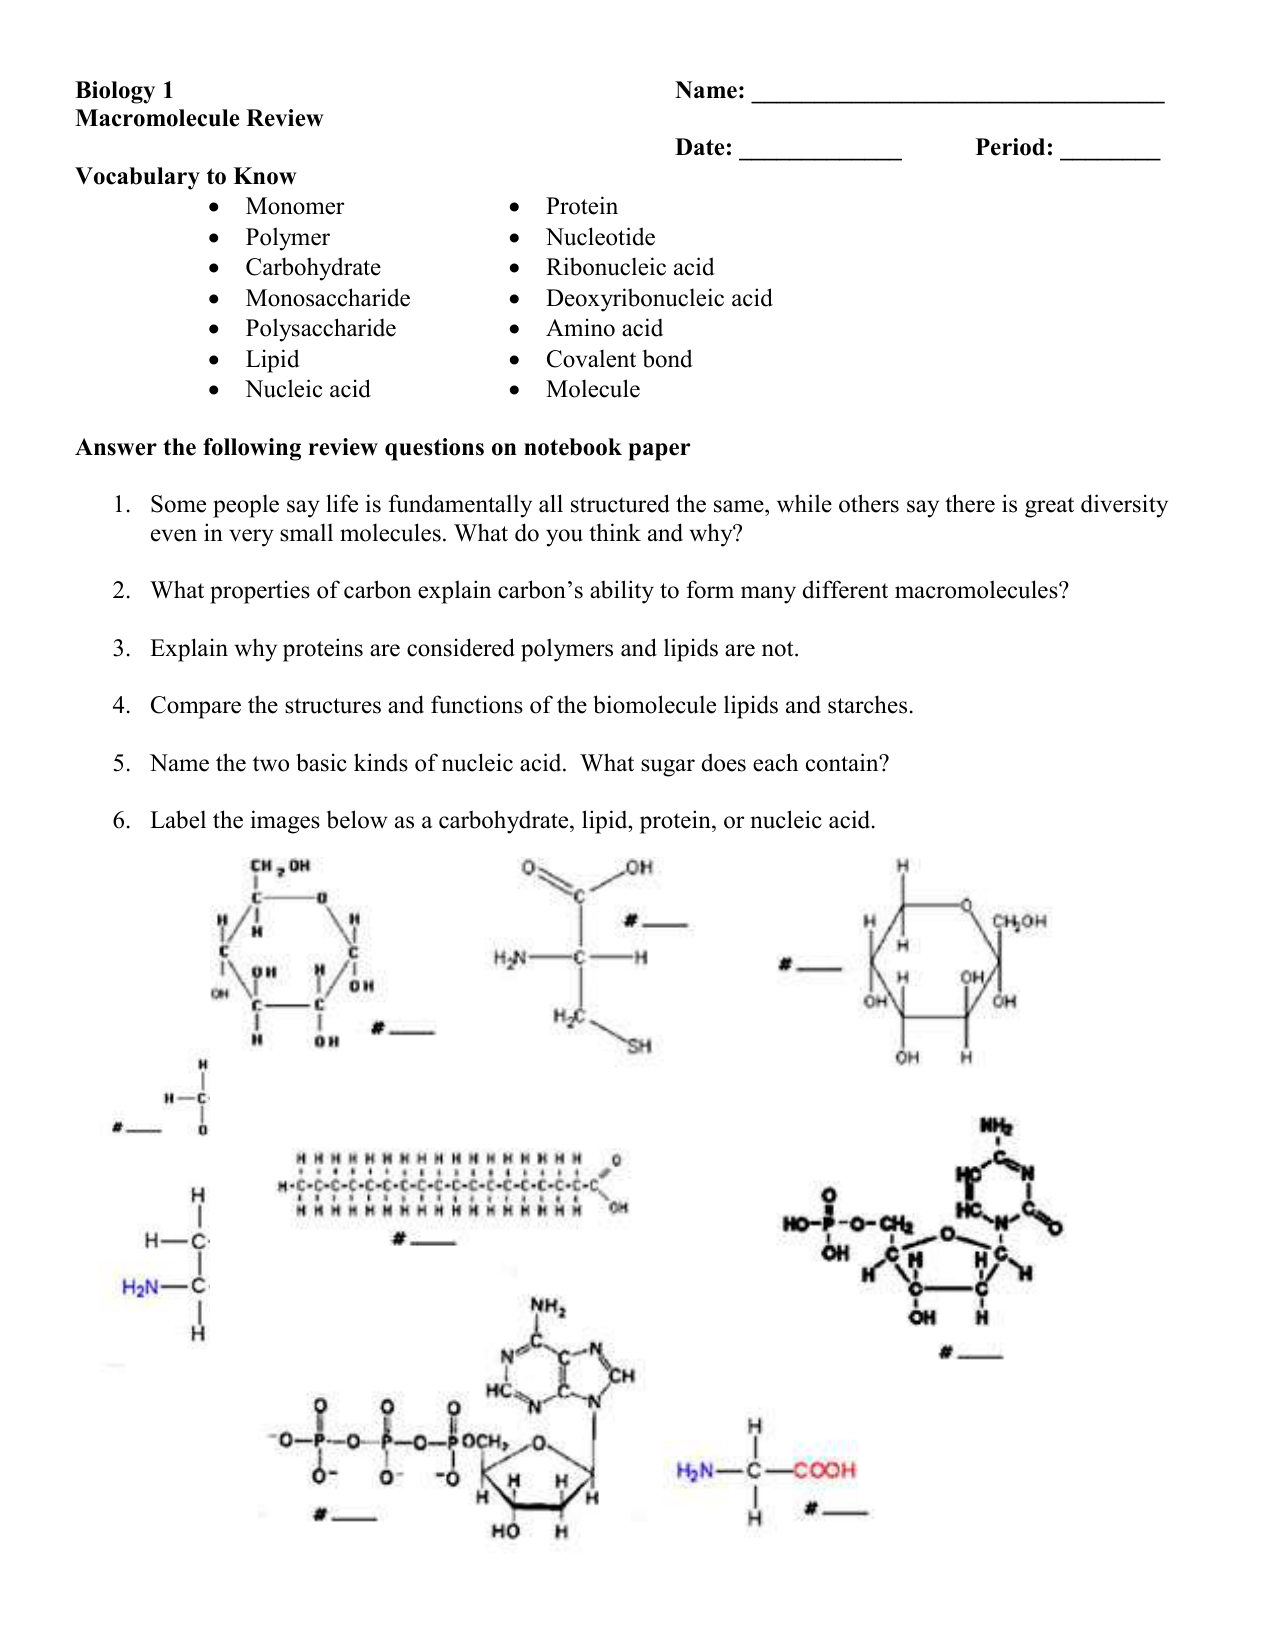 biology-macromolecules-review-worksheet-answers-free-download-qstion-co